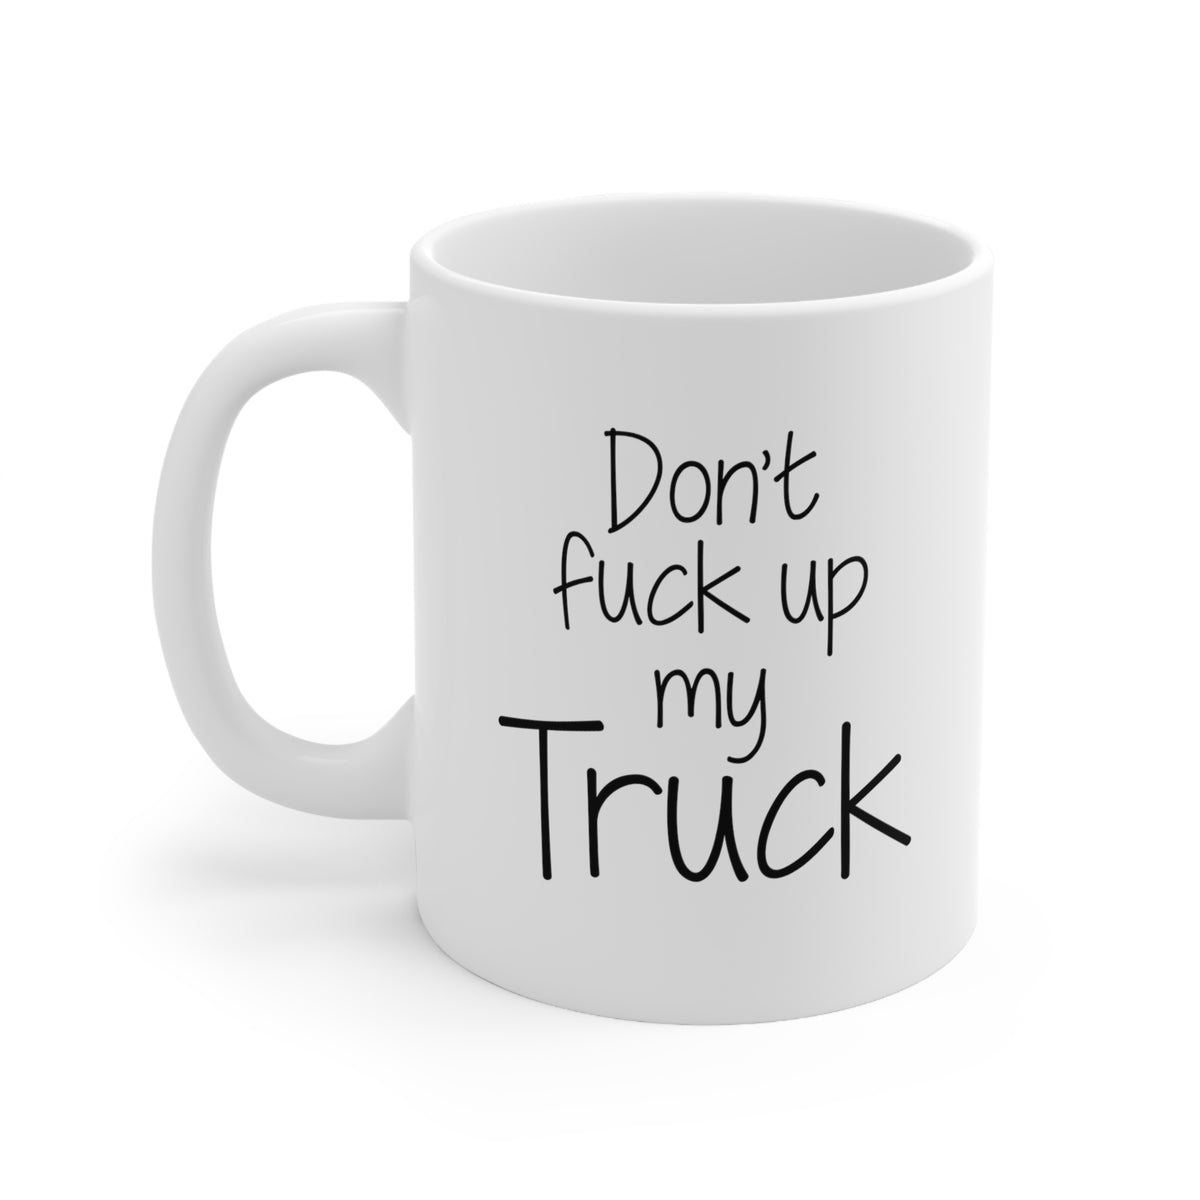 Trucker Coffee Mug - Don't fuck up my Truck - Funny Gifts For Truck Driver